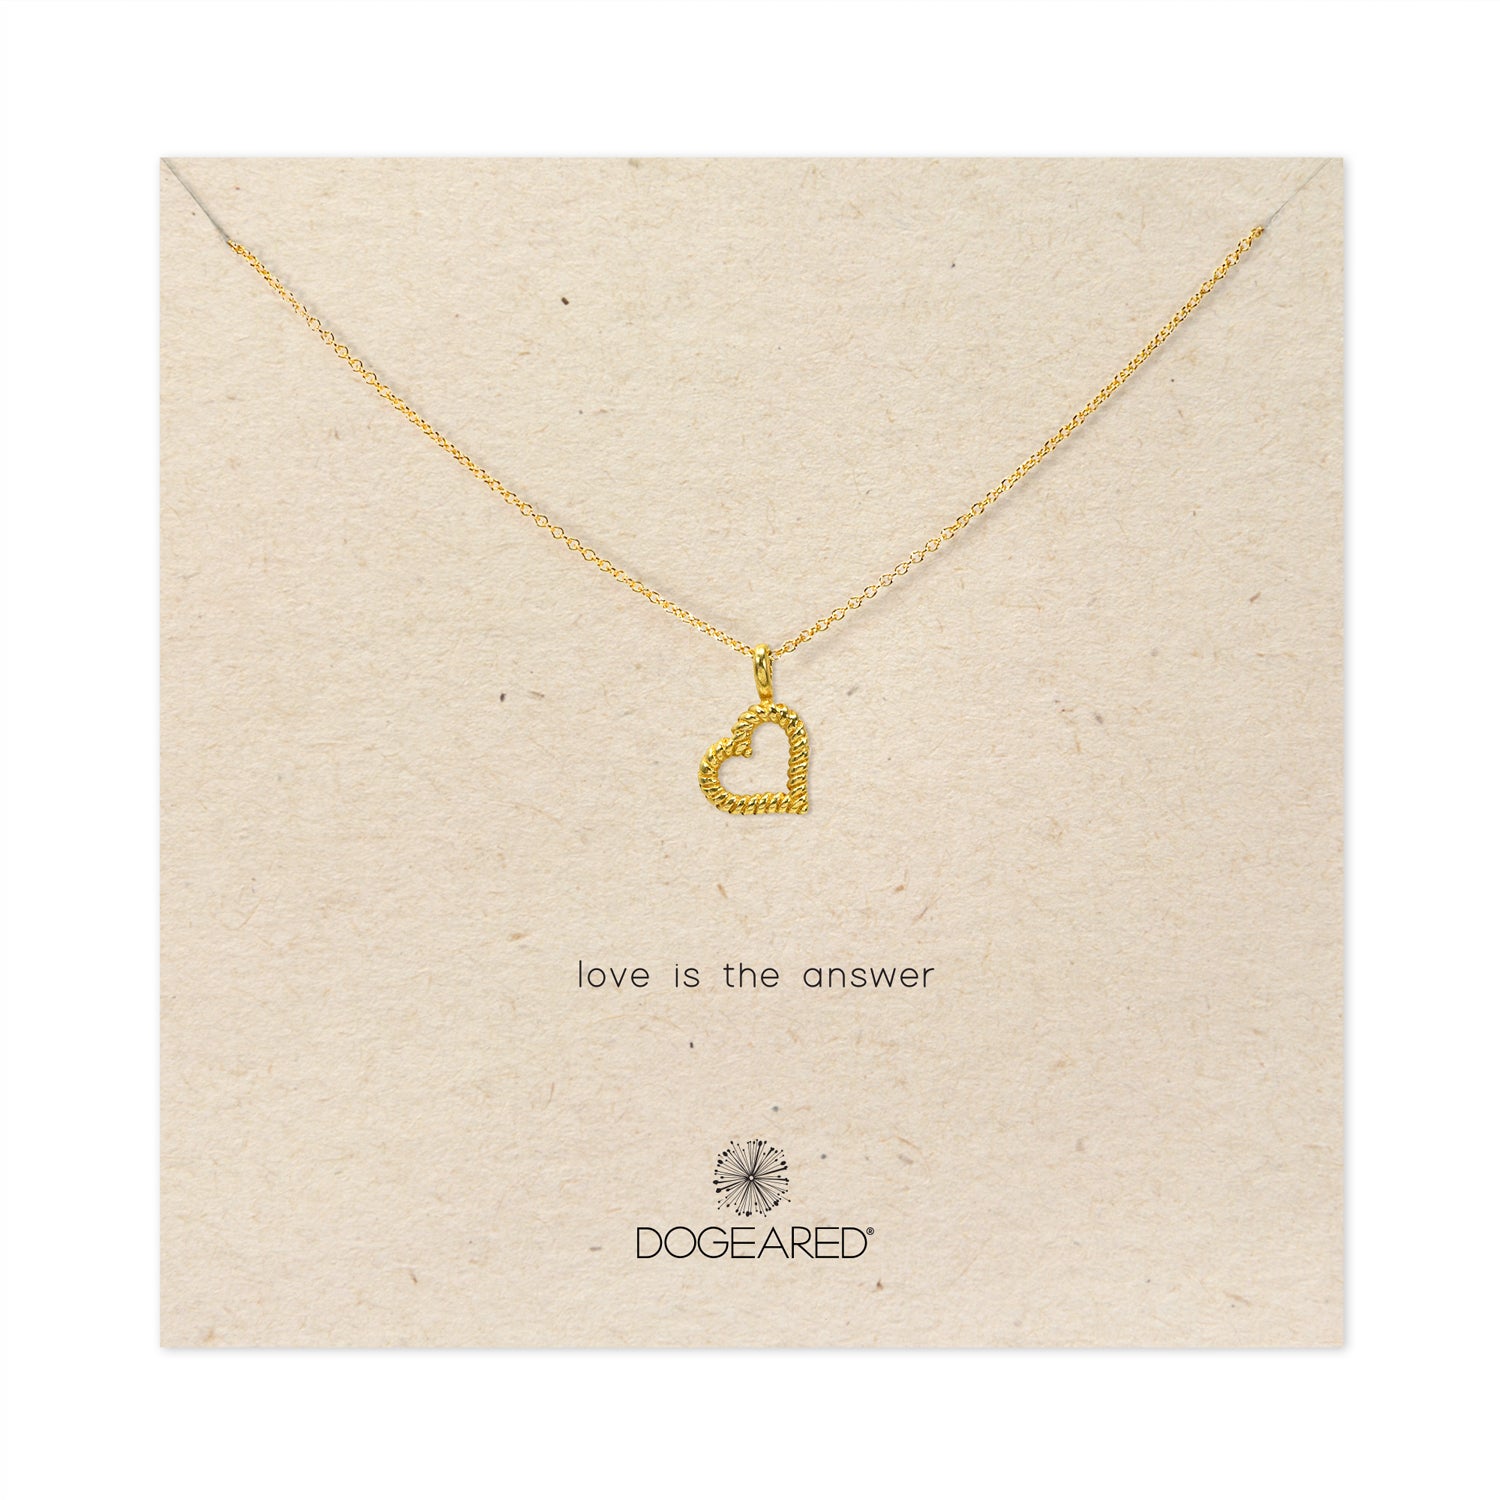 love is the answer rope heart necklace